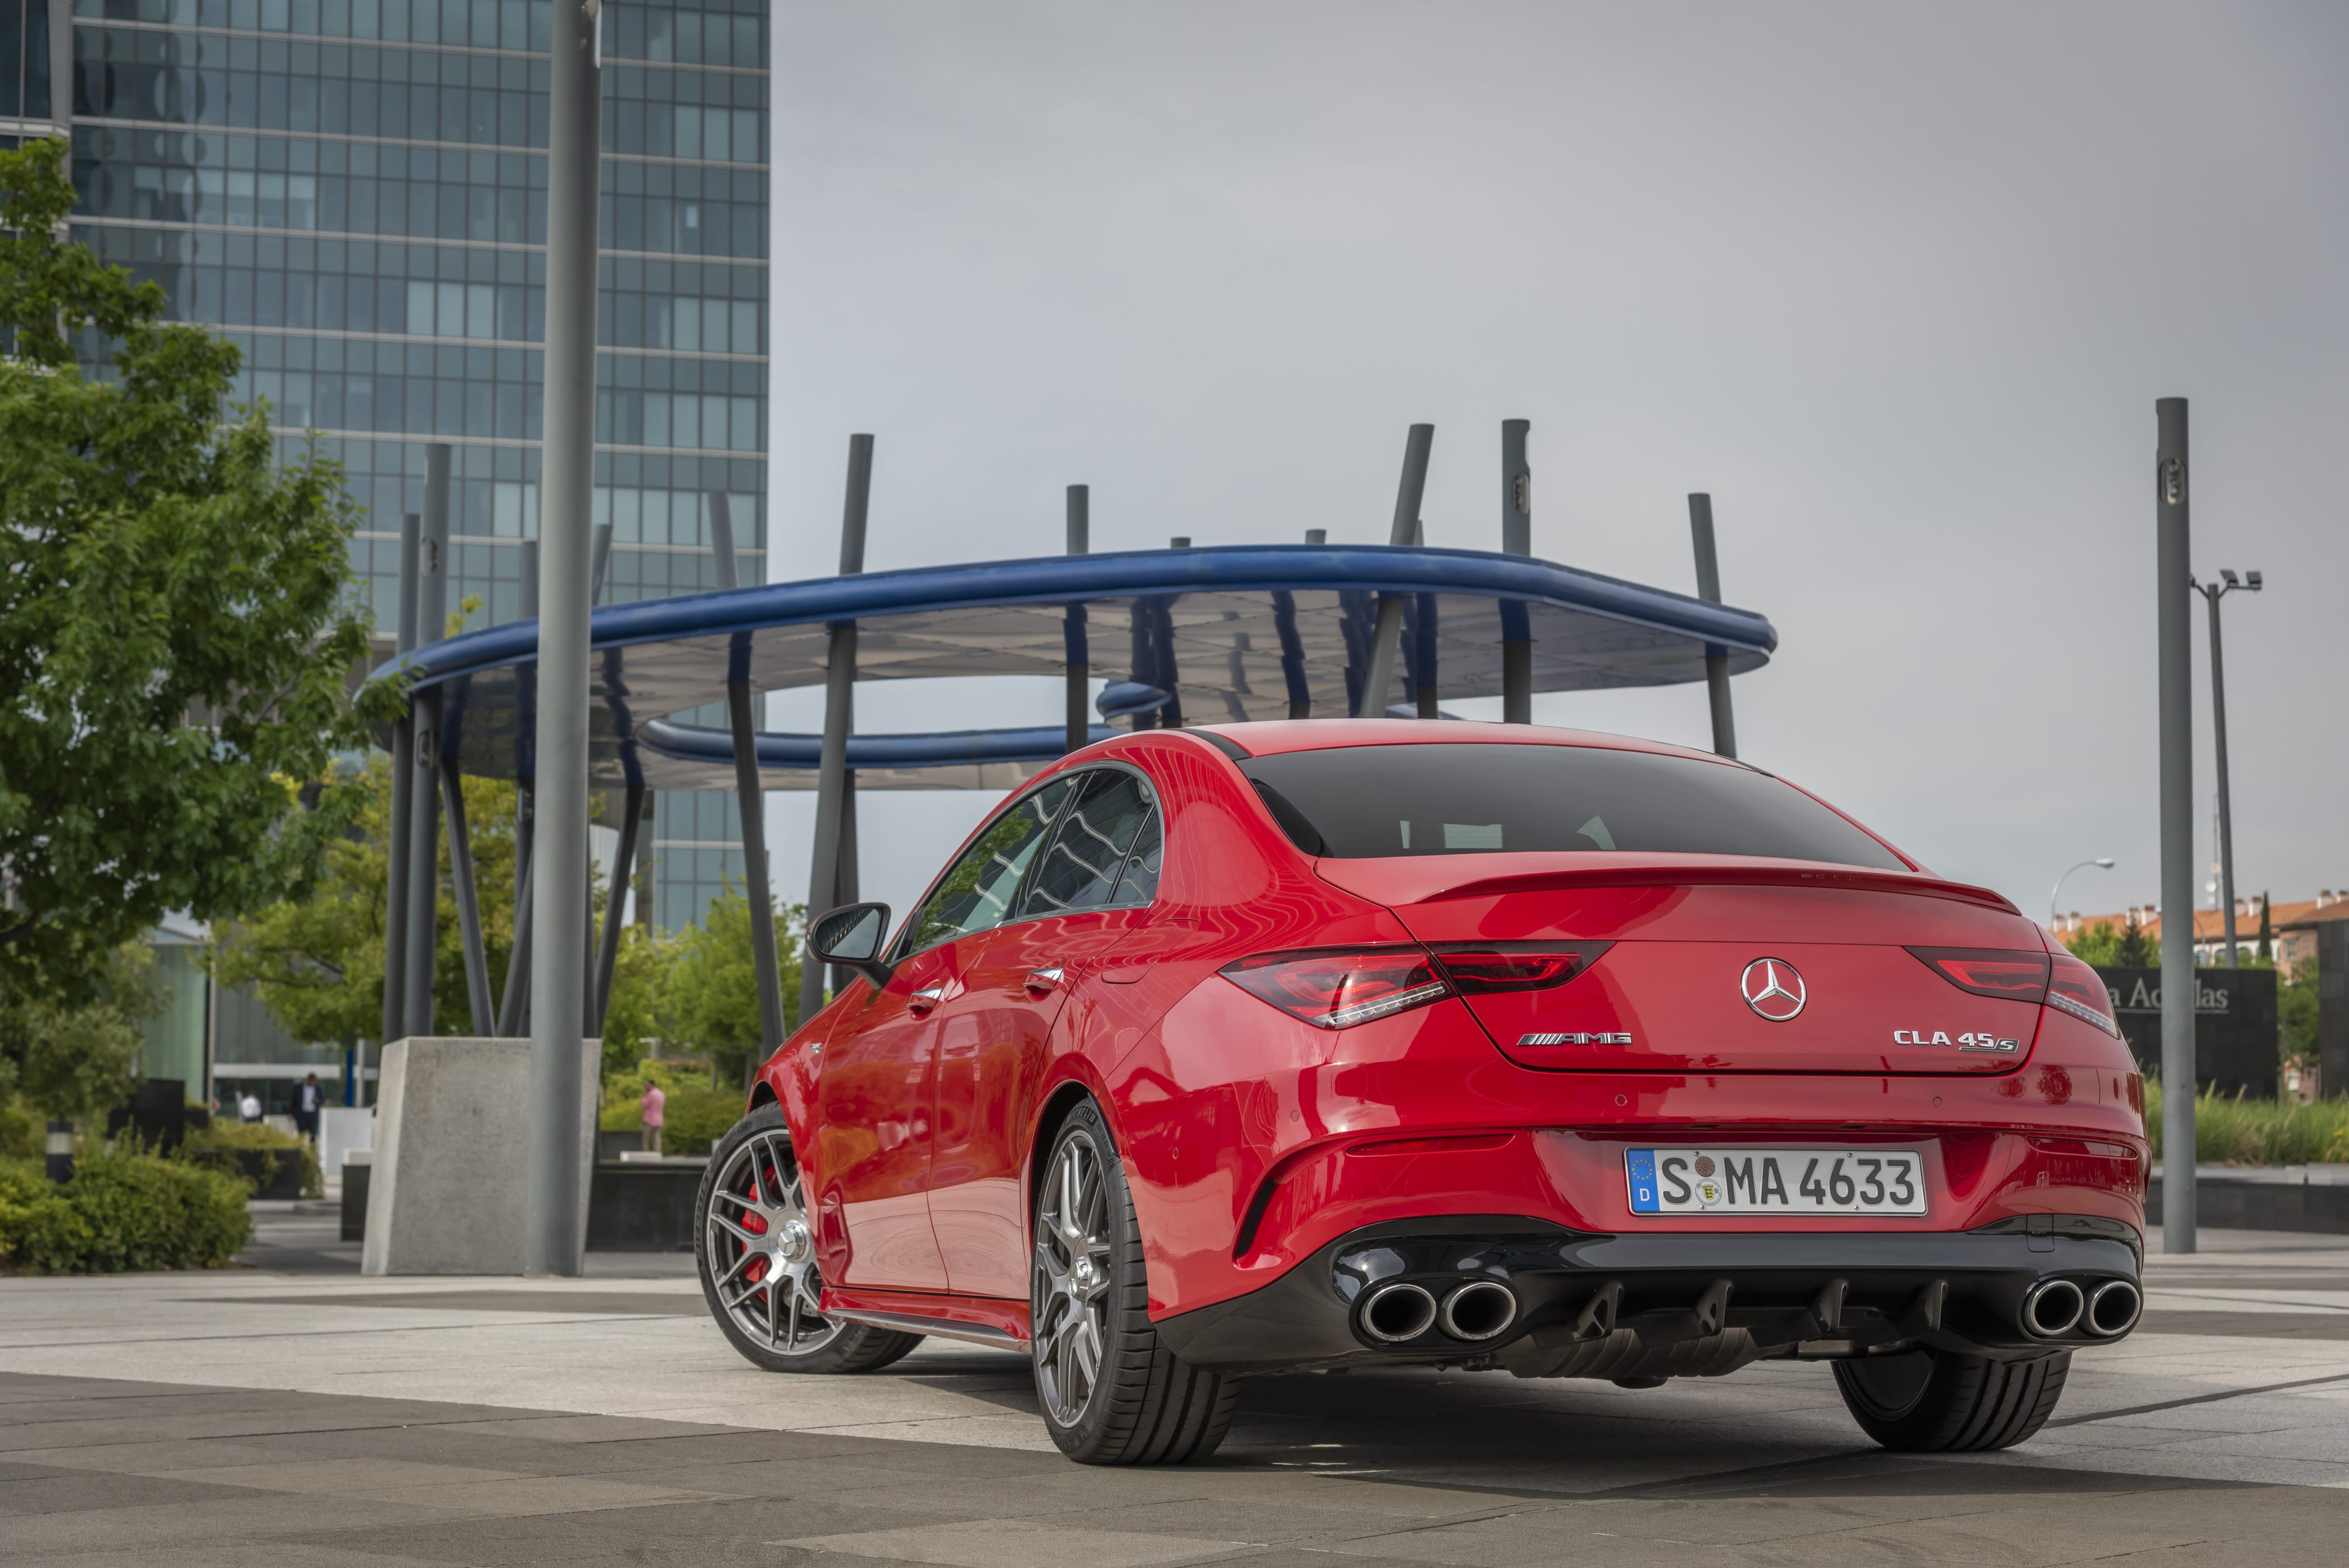 New MercedesAMG A 45 S 4MATIC + and CLA 45 S 4MATIC+ land